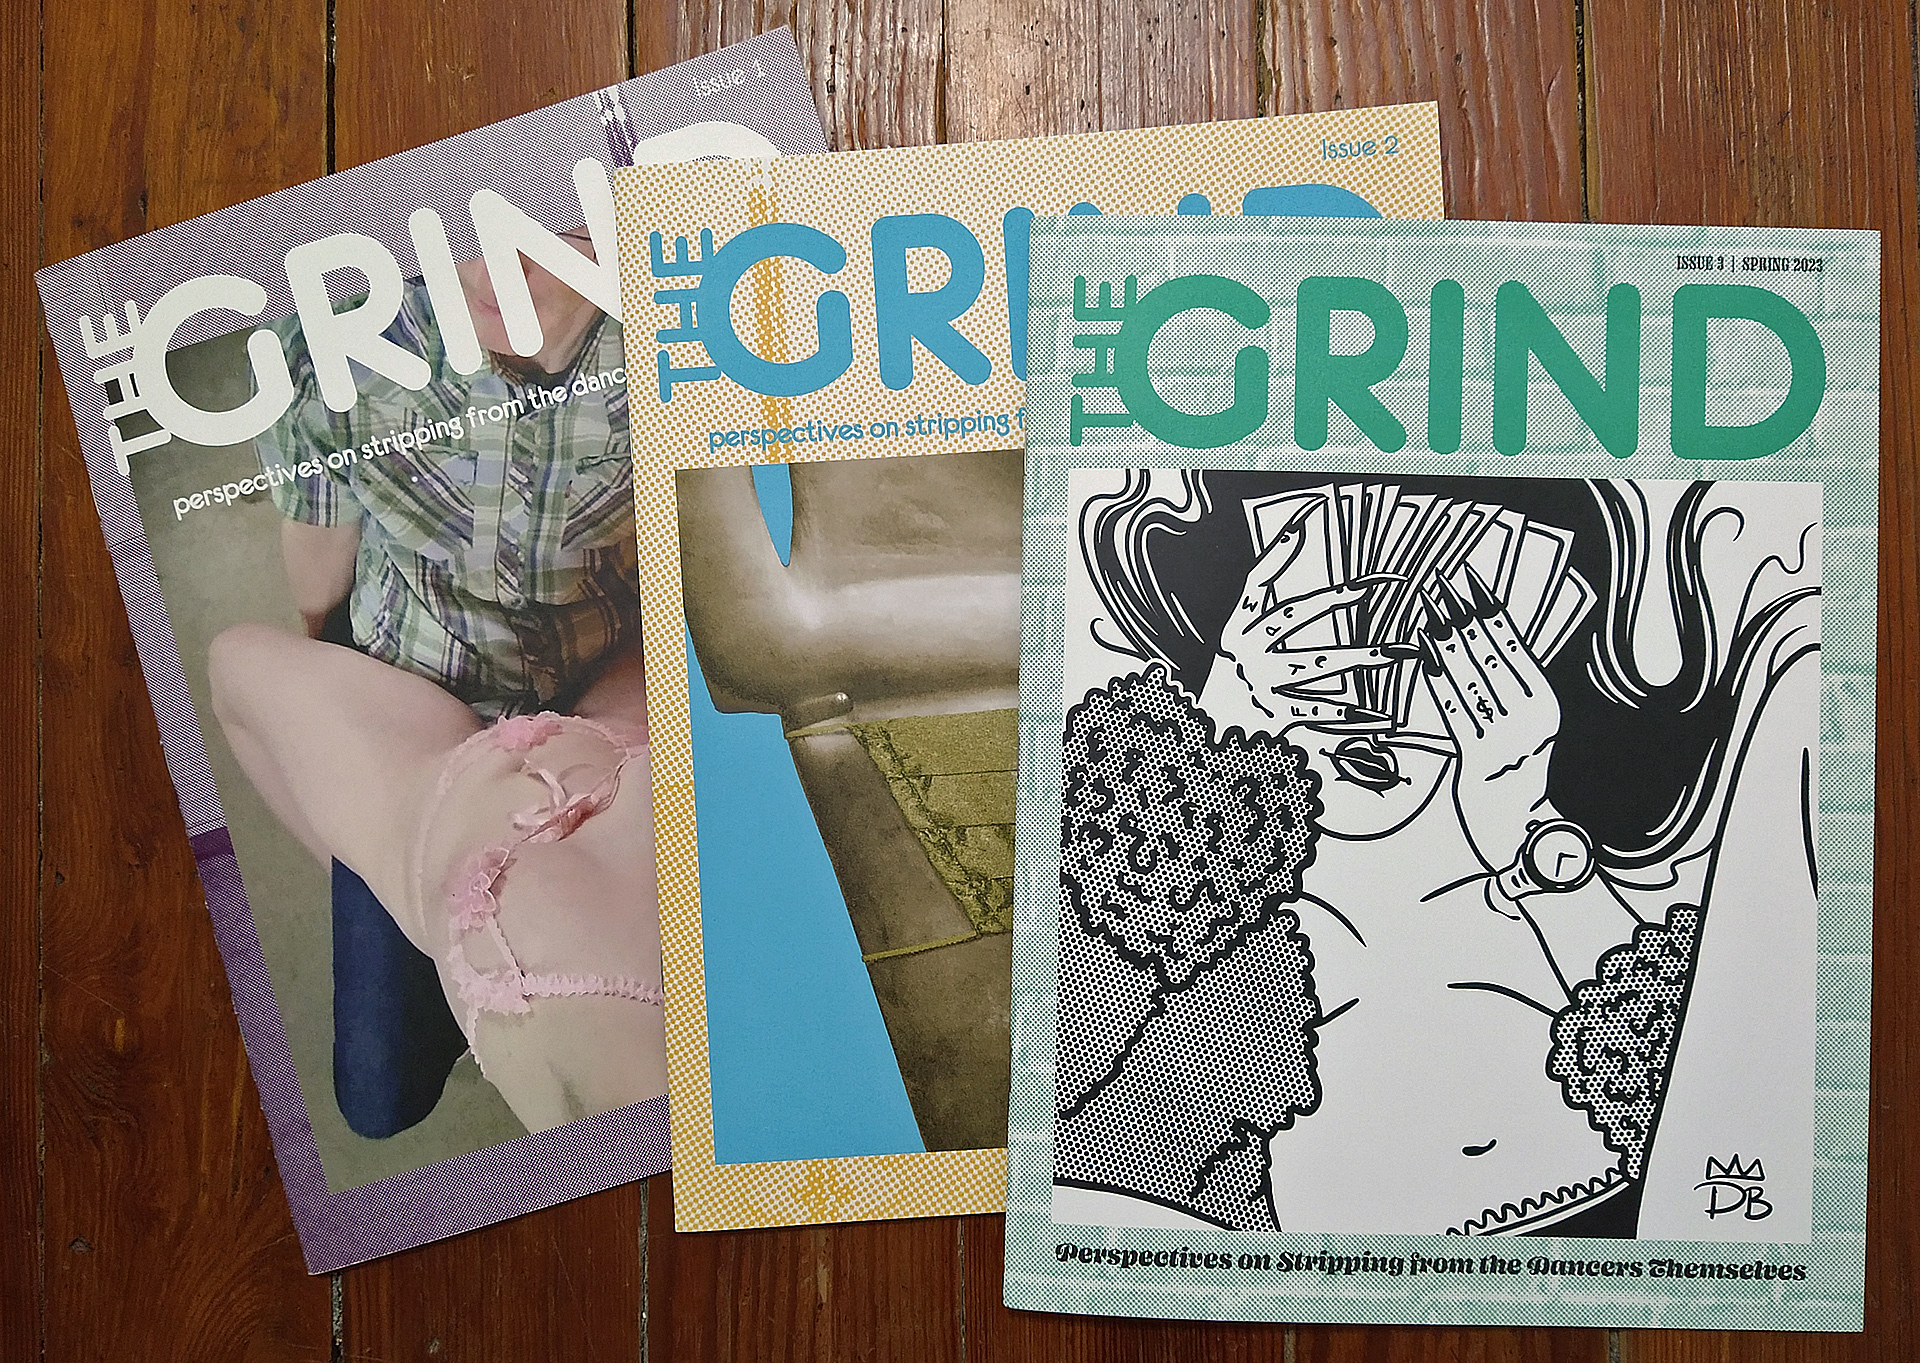 3 different issues of The GRIND magazine are displayed from earliest to latest, fanned out on a wooden background.